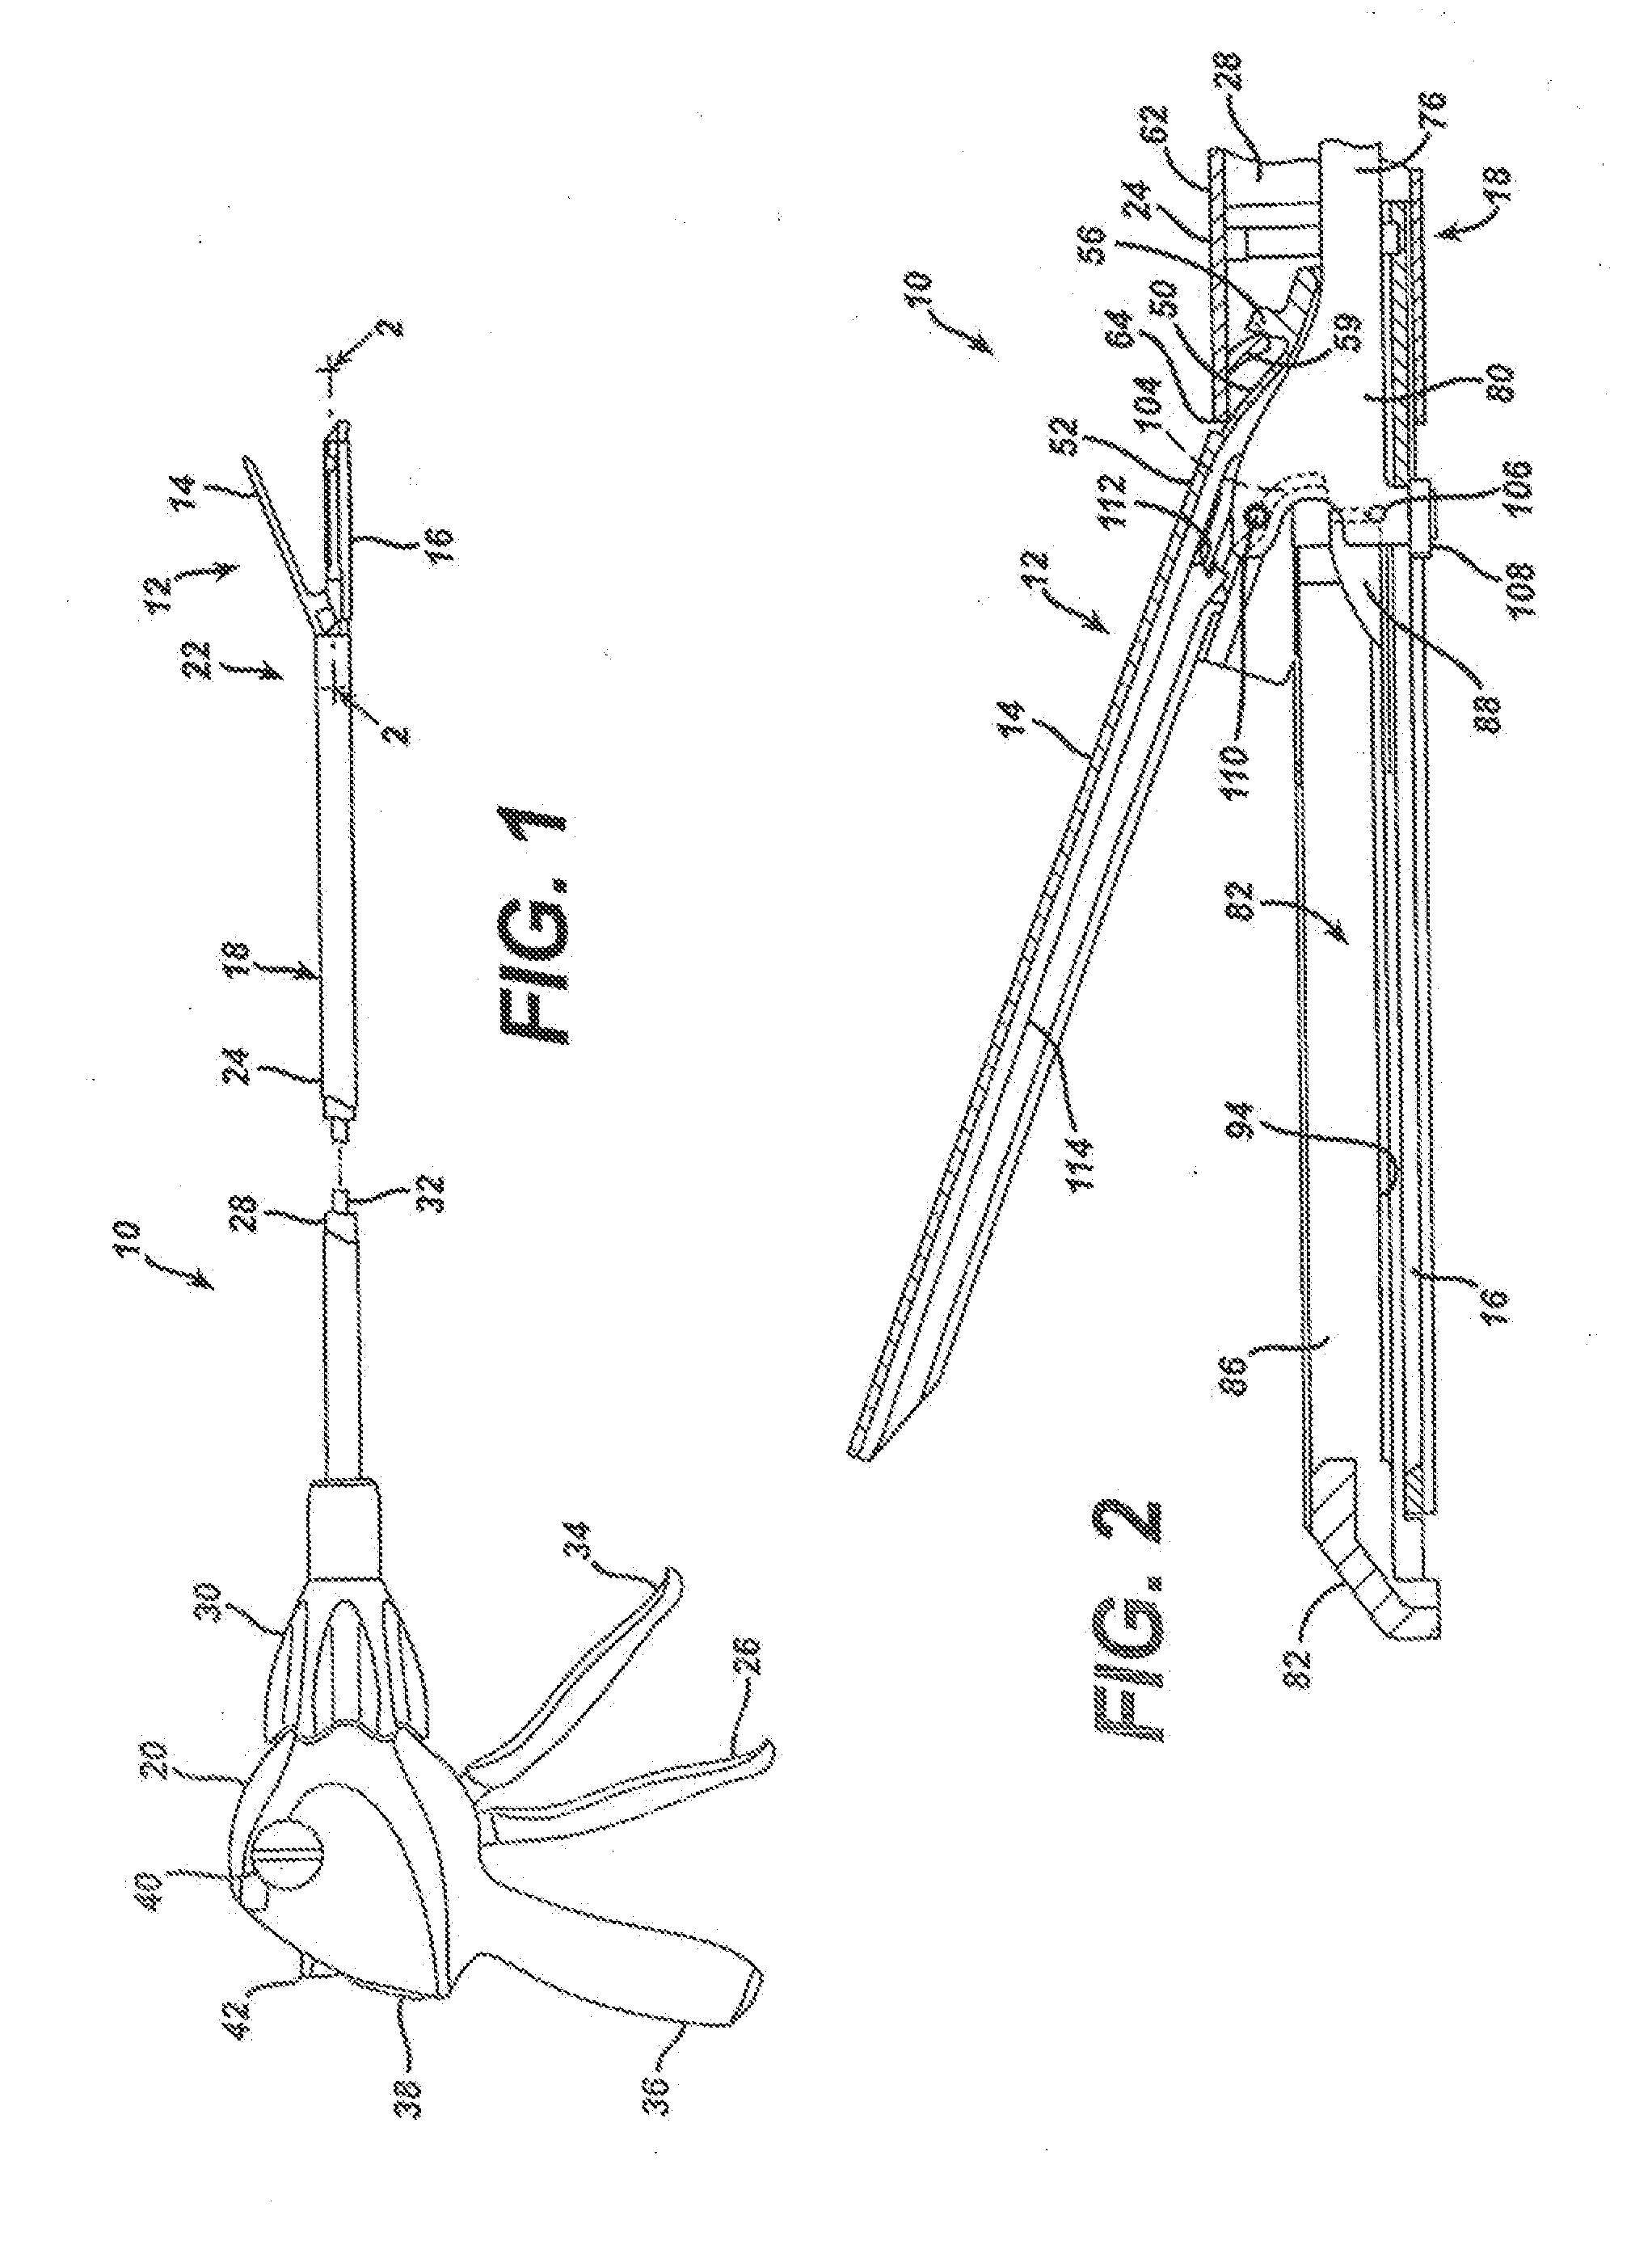 Surgical Stapling Instrument Having An Improved Coating